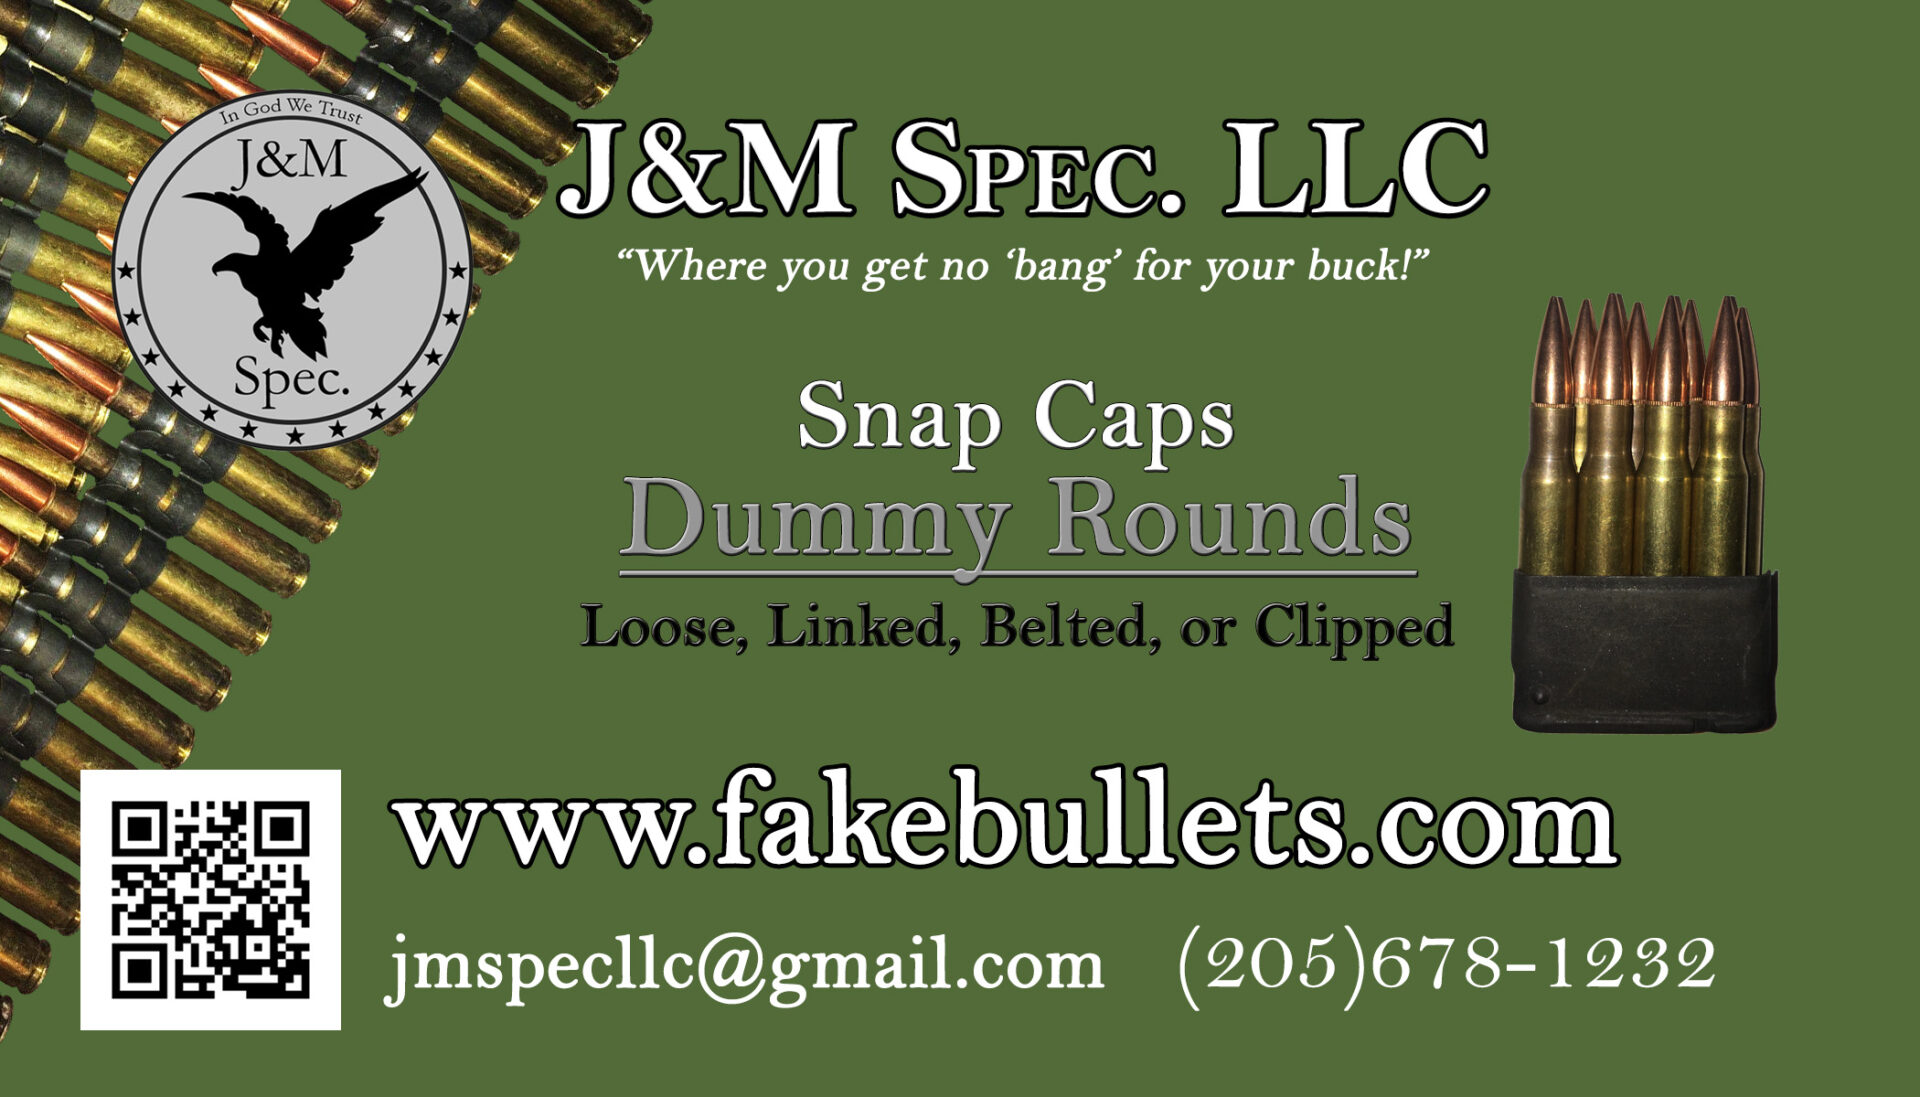 A business card for fake bullets and dummy rounds.